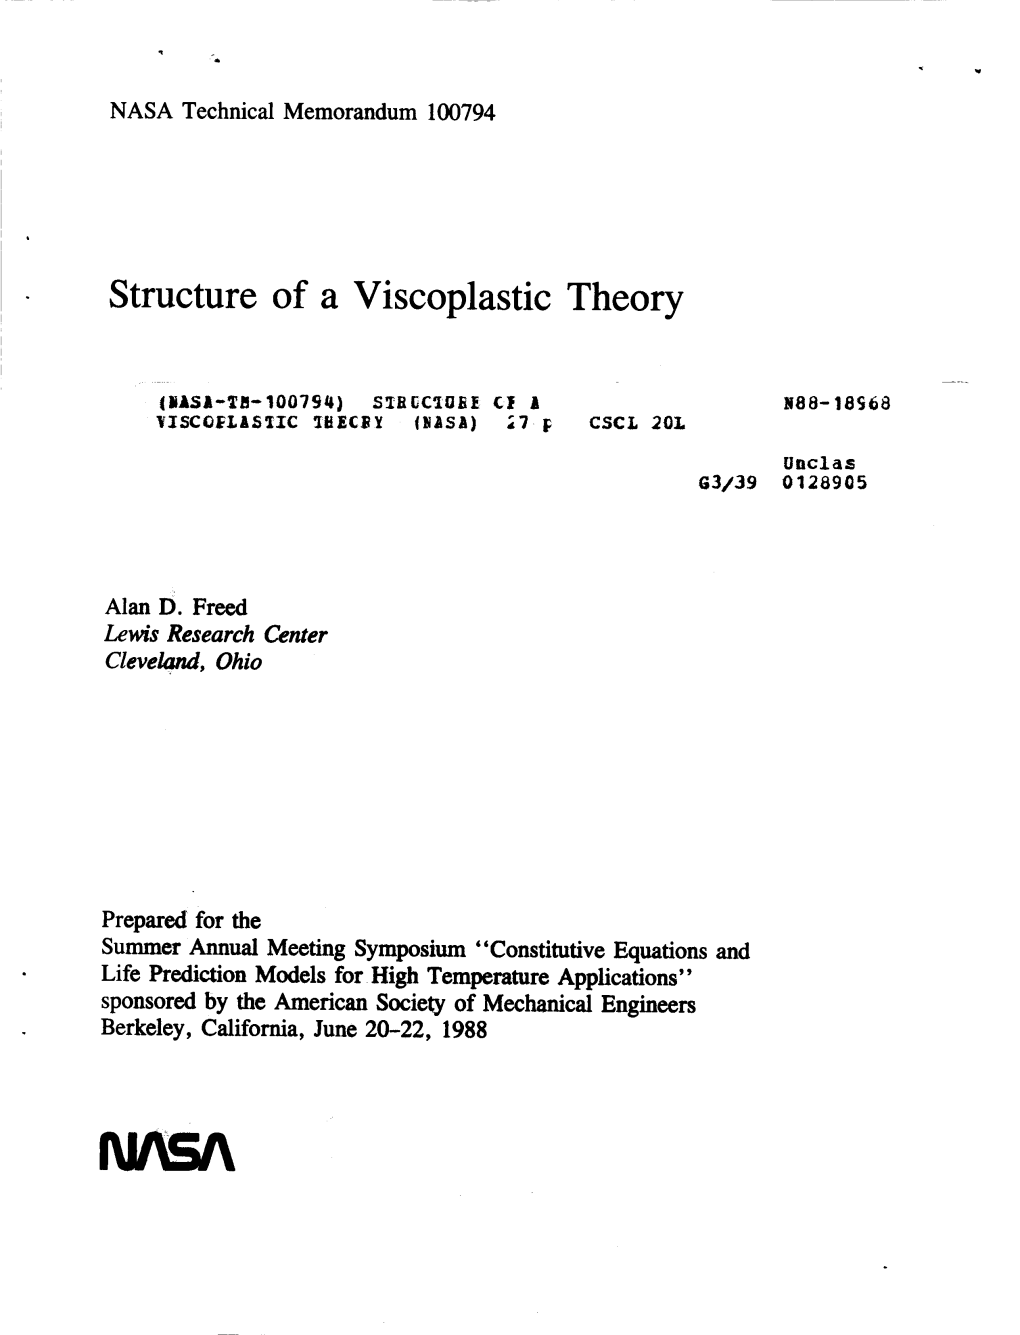 Structure of a Viscoplastic Theory